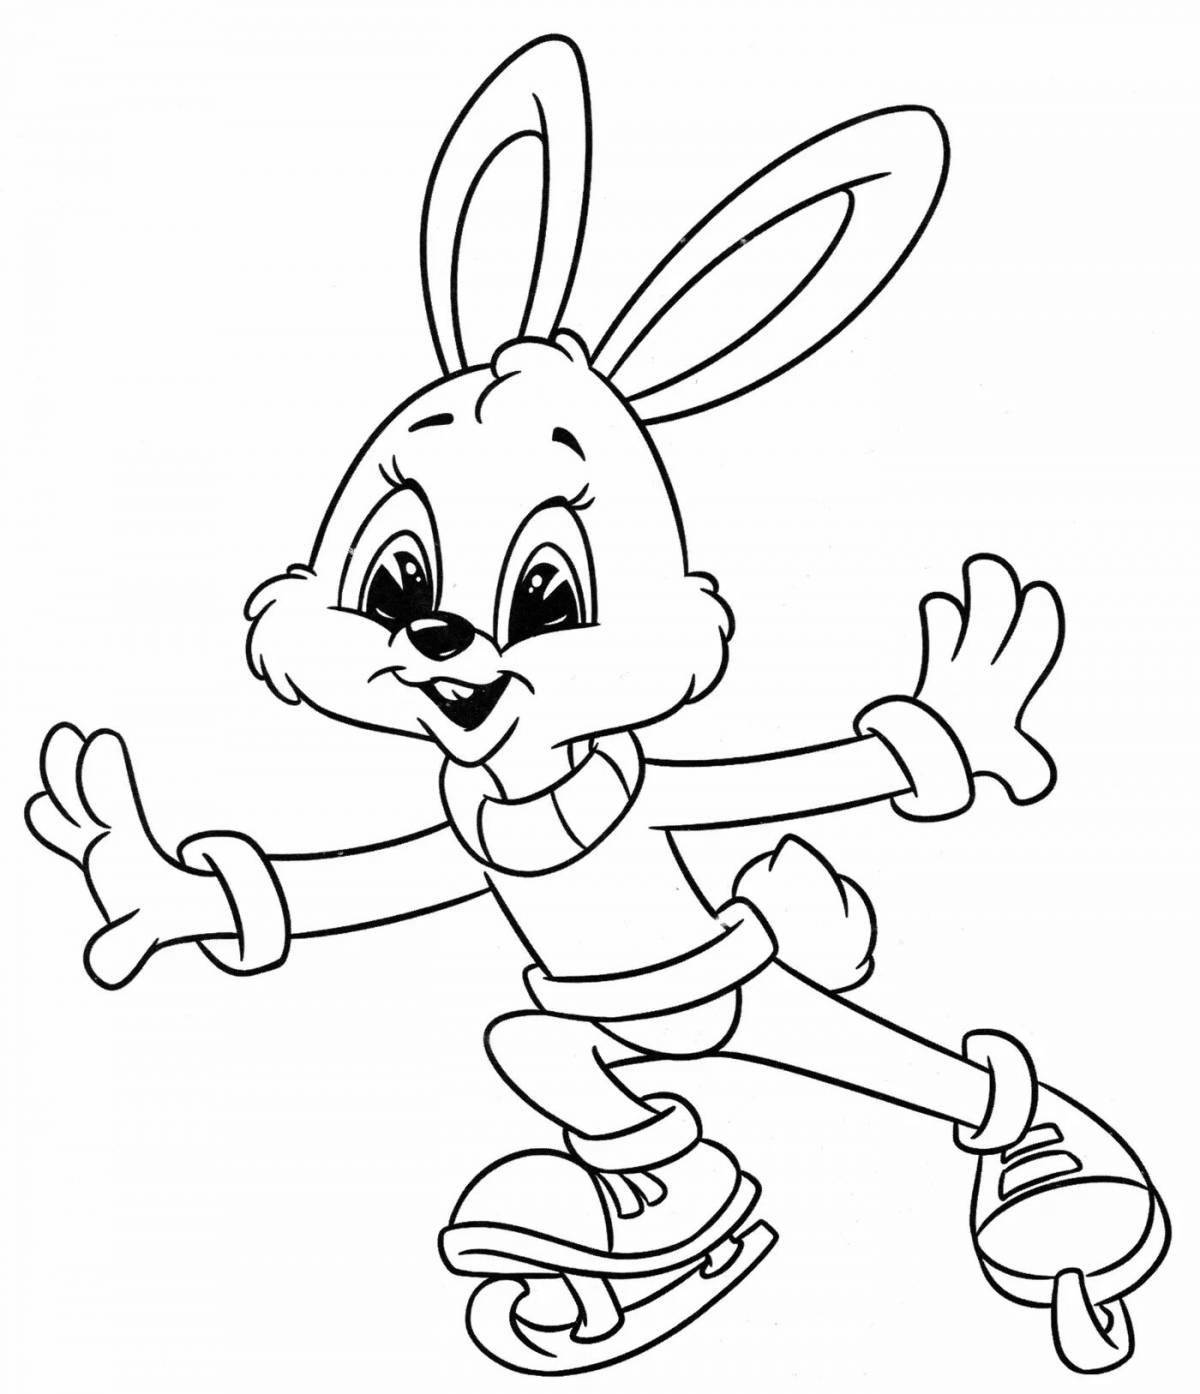 Coloring book friendly cartoon hare